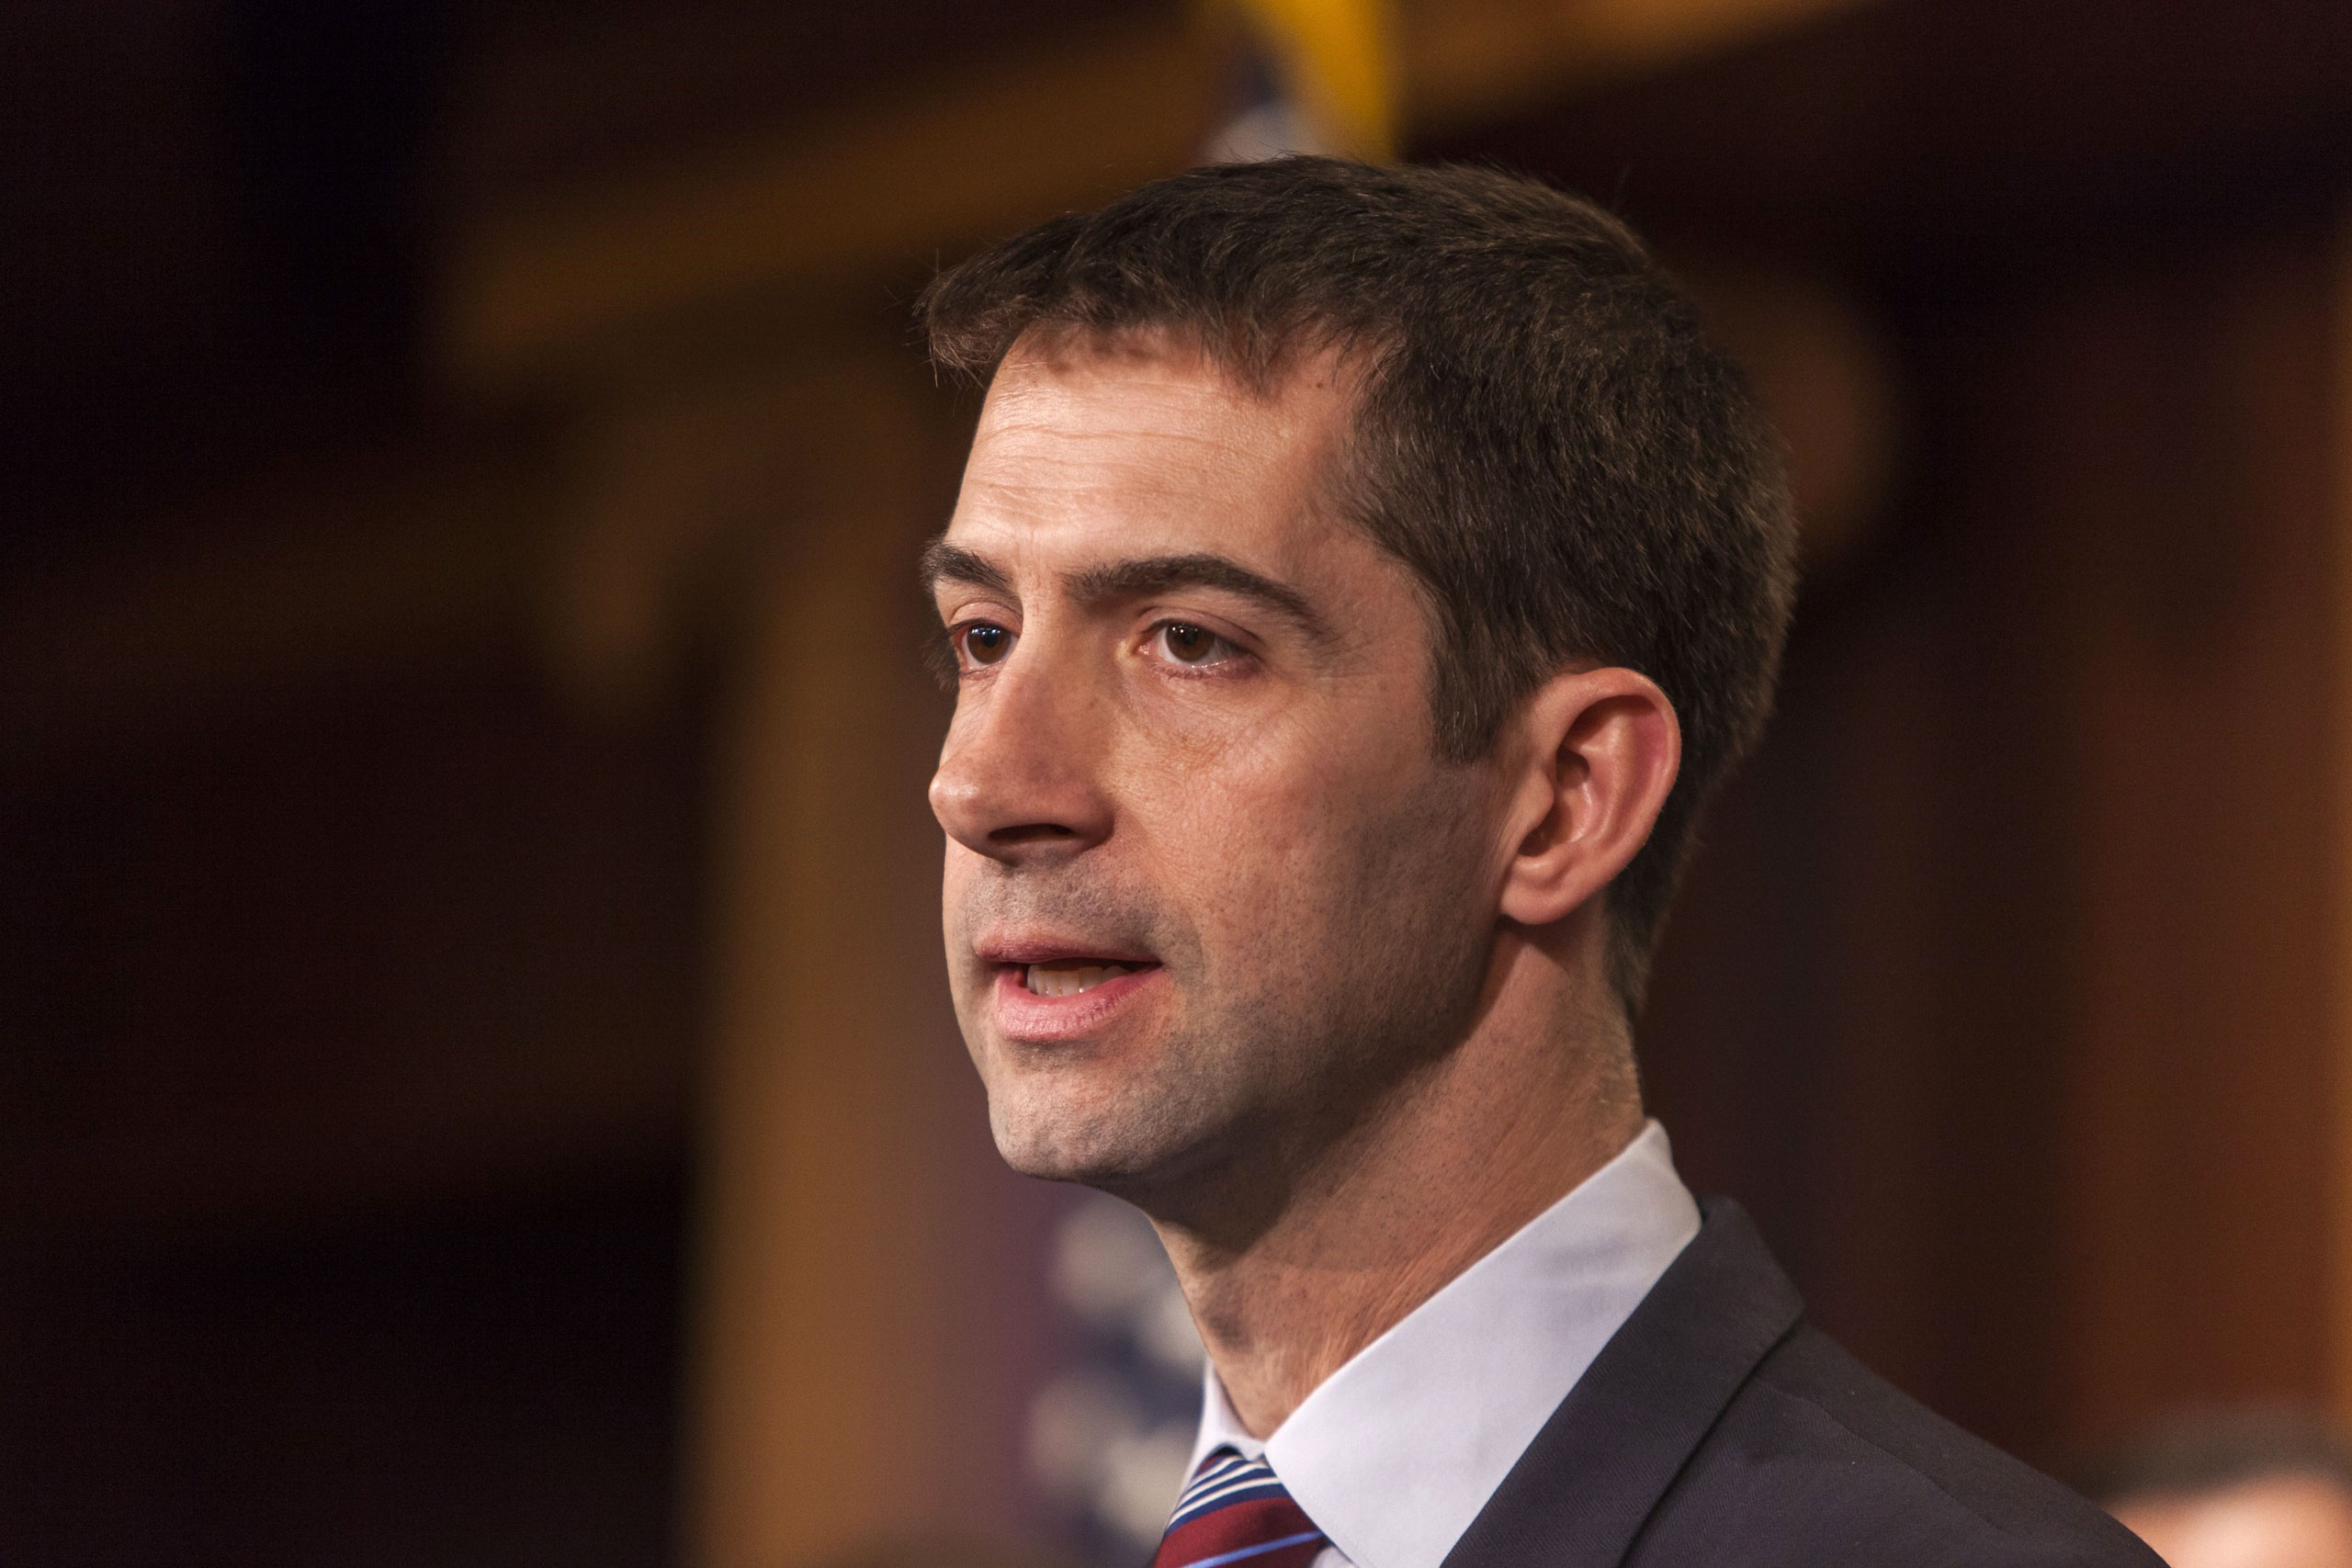 Senator Tom Cotton speaks during a news conference with members of the Senate Armed Services Committee about arming Ukraine in the fight against Russia in Washington, D.C. on Feb. 5, 2015.